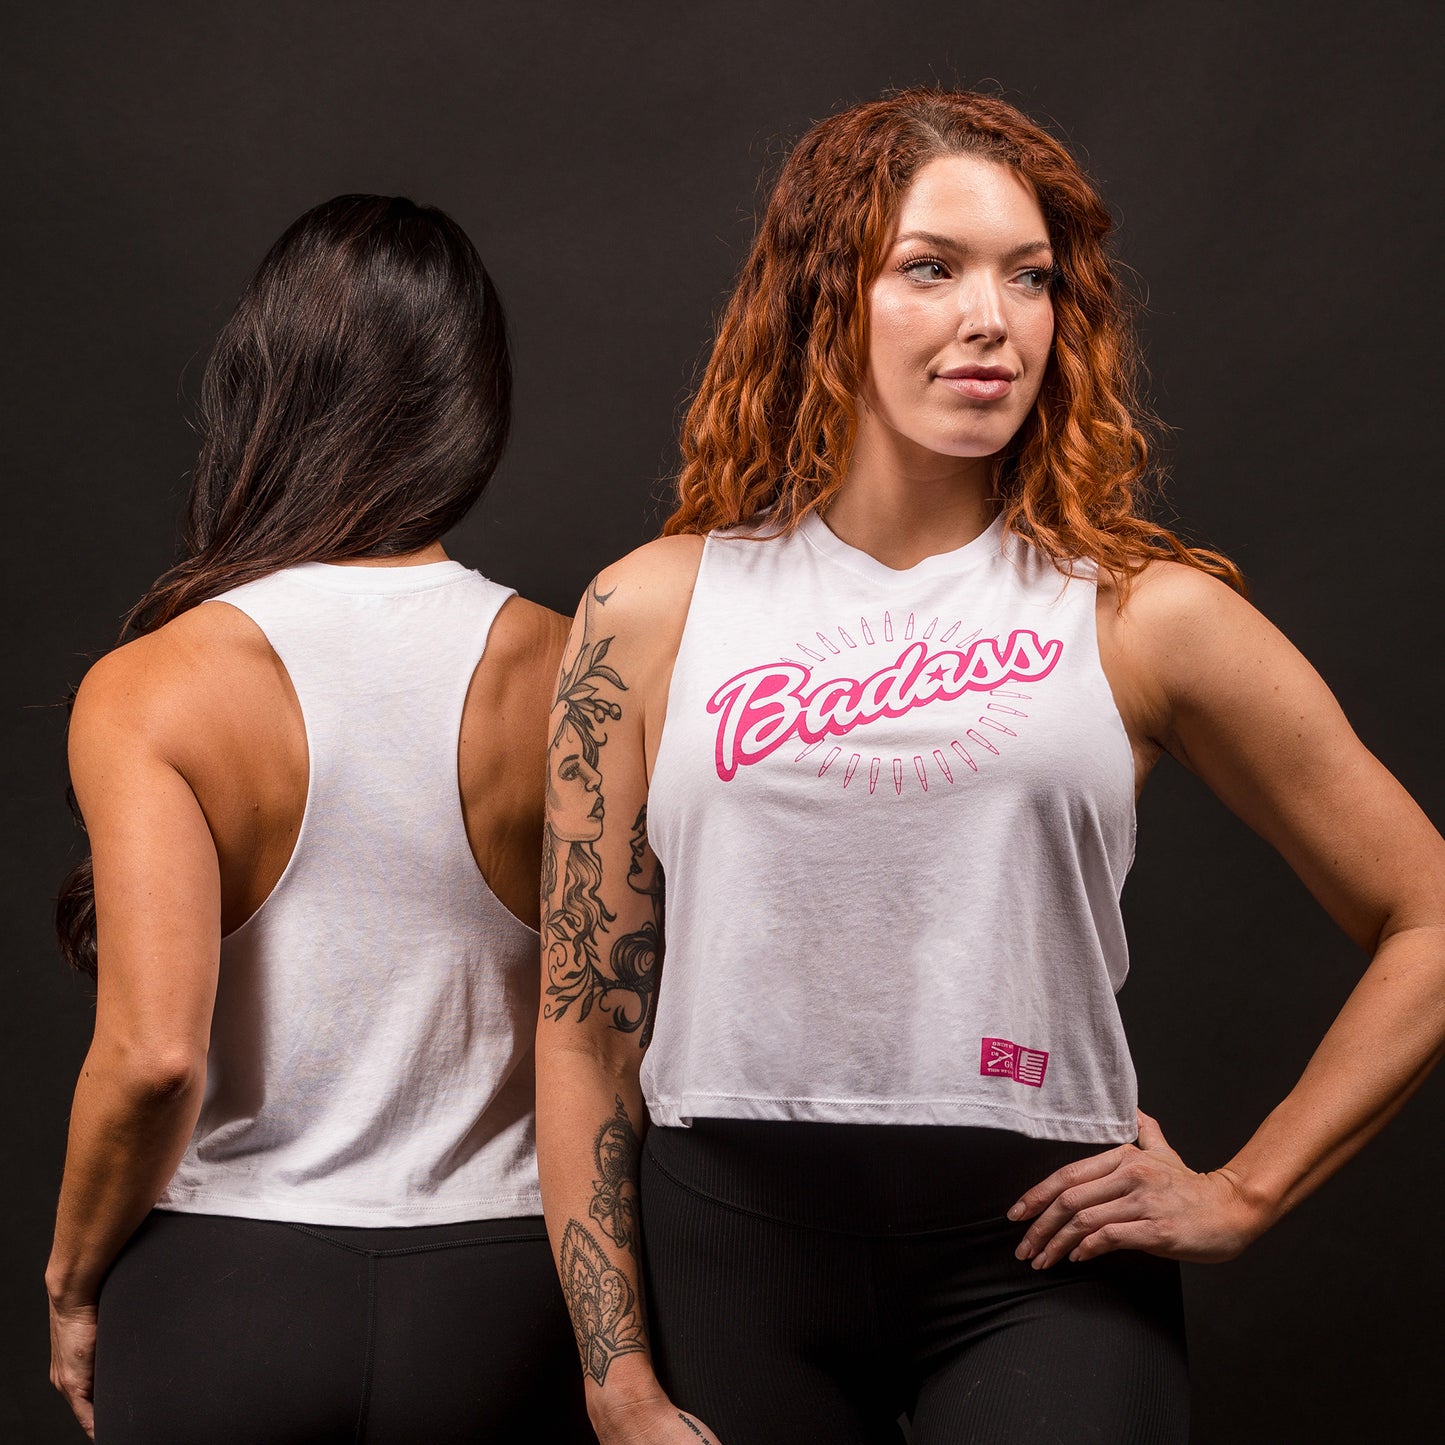 Pink and White Workout Tank Top for Women 